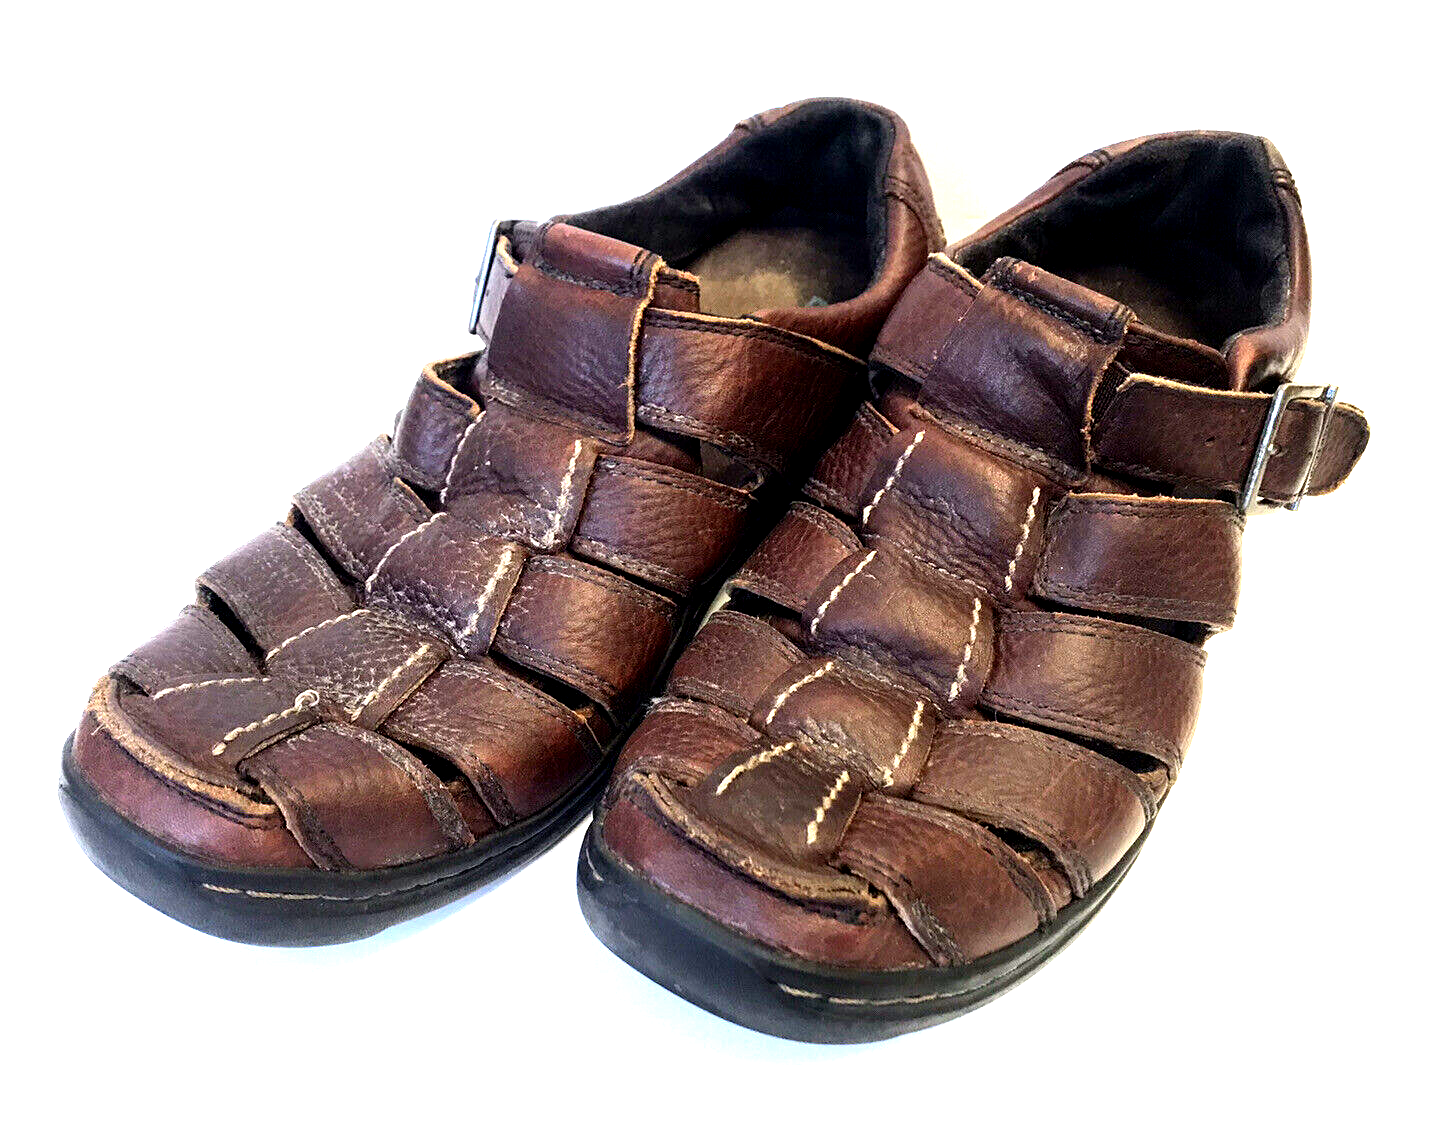 Timberland Earthkeepers Mens SZ 11 Sandals Brown Leather Adustable Straps  Hiking | eBay